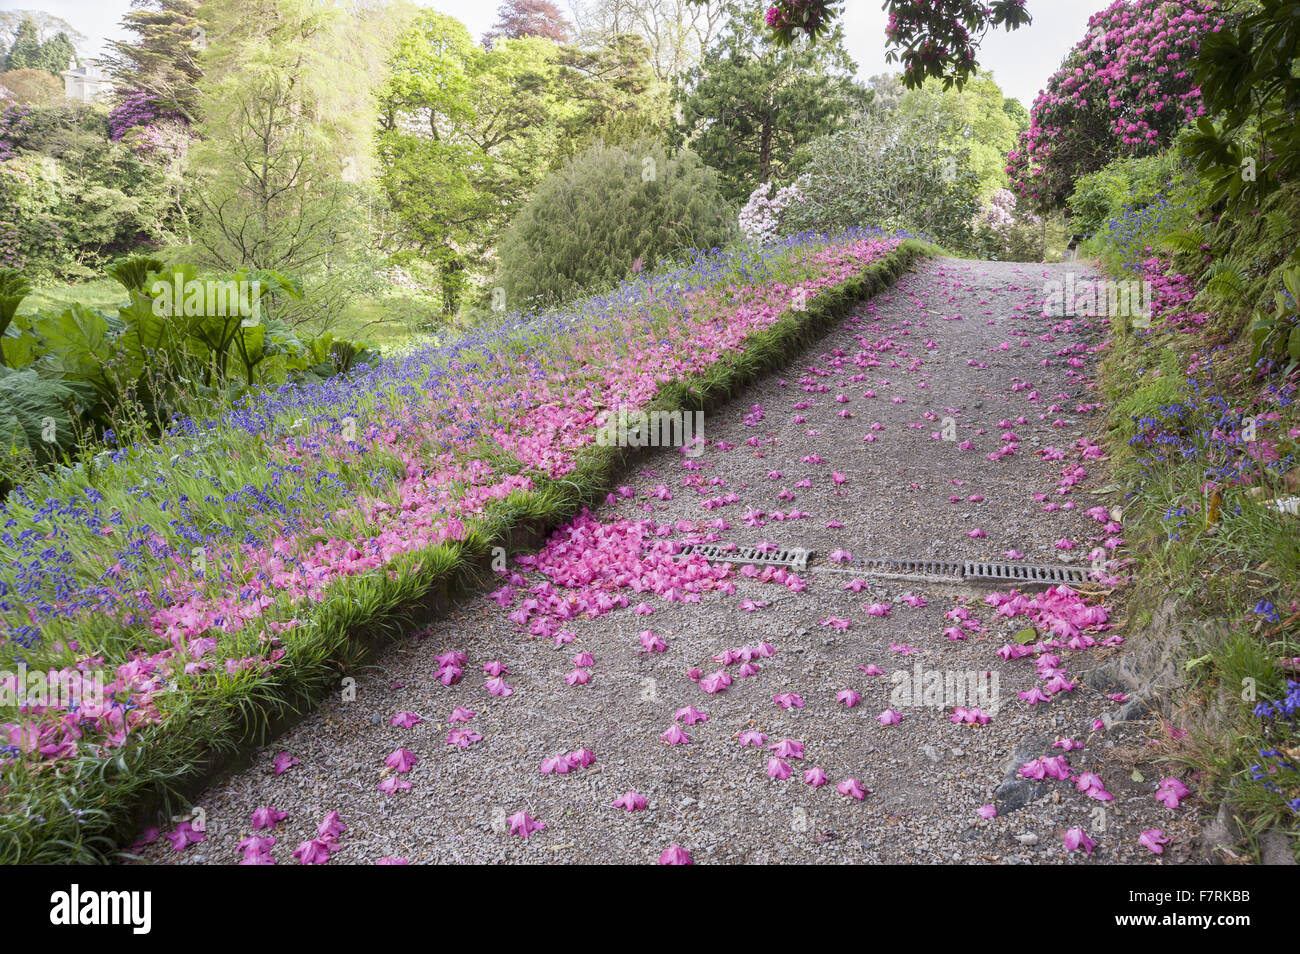 Fallen petals of a pink rhododendron mingle with bluebells at Glendurgan Garden, Cornwall. Glendurgan was described by its creators, the Quakers Alfred and Sarah Fox, as a 'small peace [sic] of heaven on earth'. Stock Photo